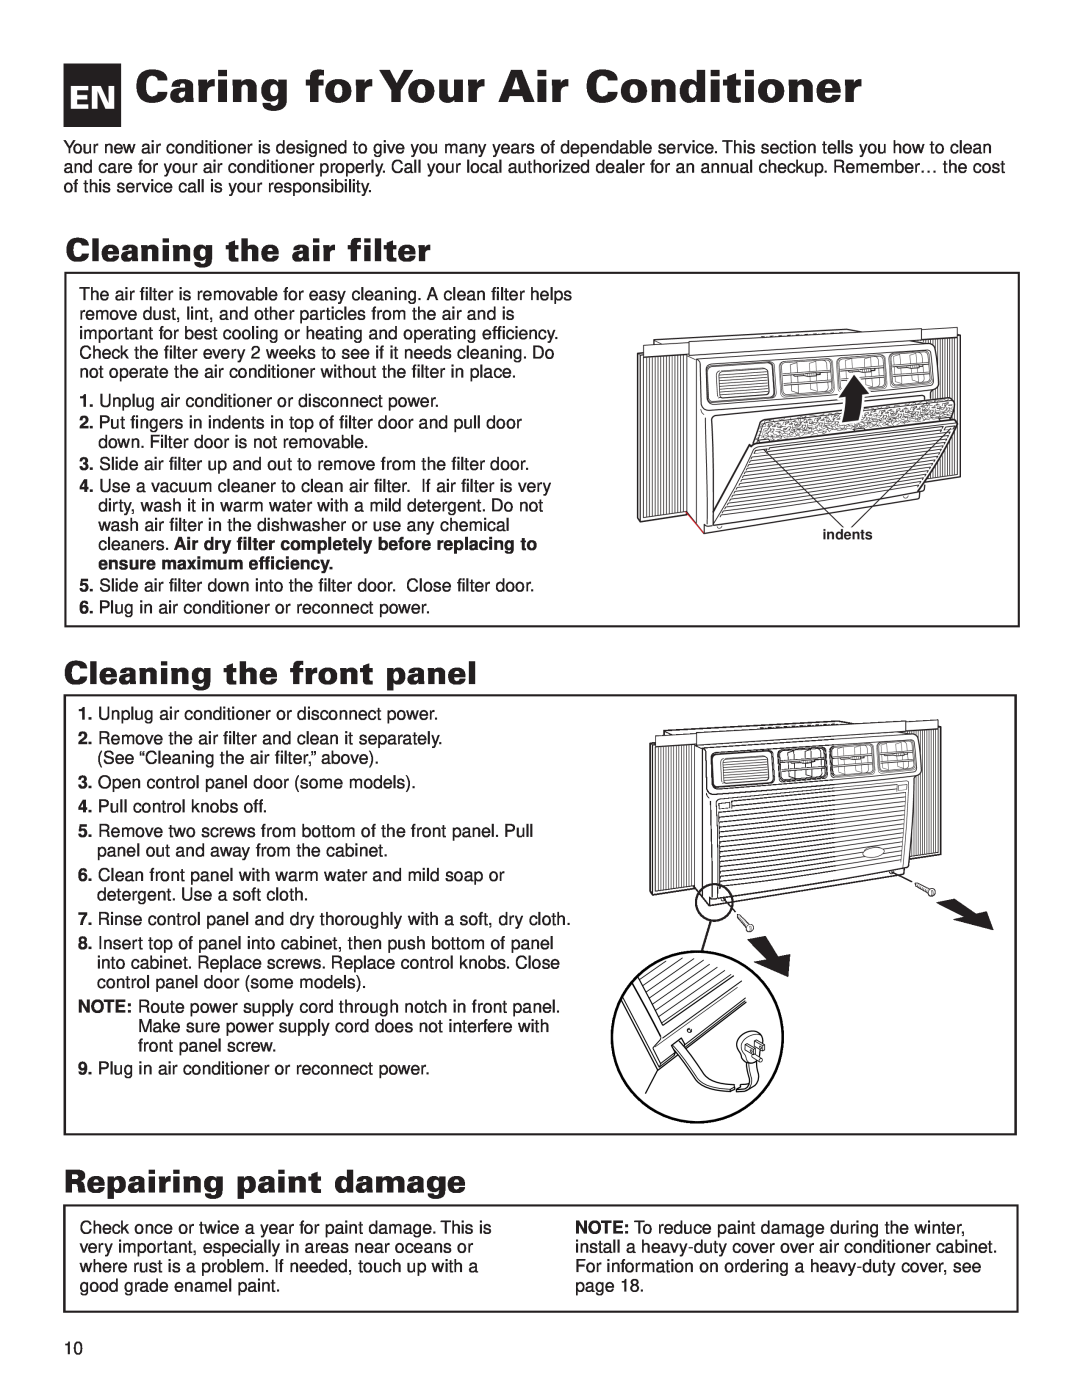 Whirlpool ACE082XH0 manual EN Caring for Your Air Conditioner, Cleaning the air filter, Cleaning the front panel 